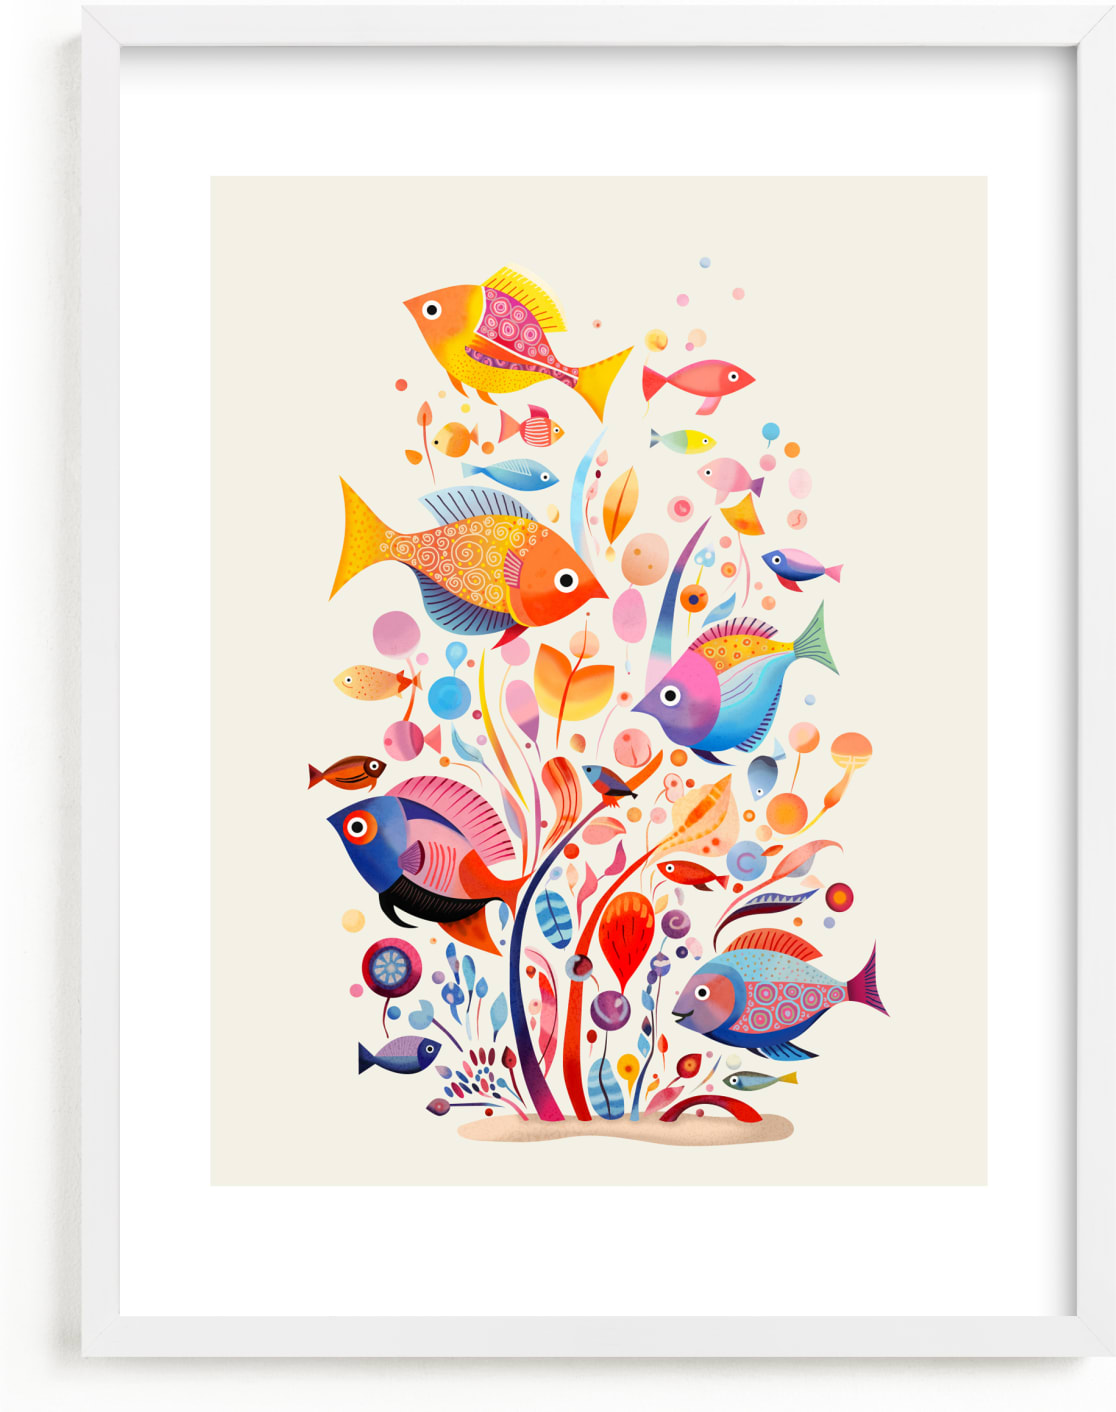 This is a colorful kids wall art by Tatjana Koraksic called Fishes.